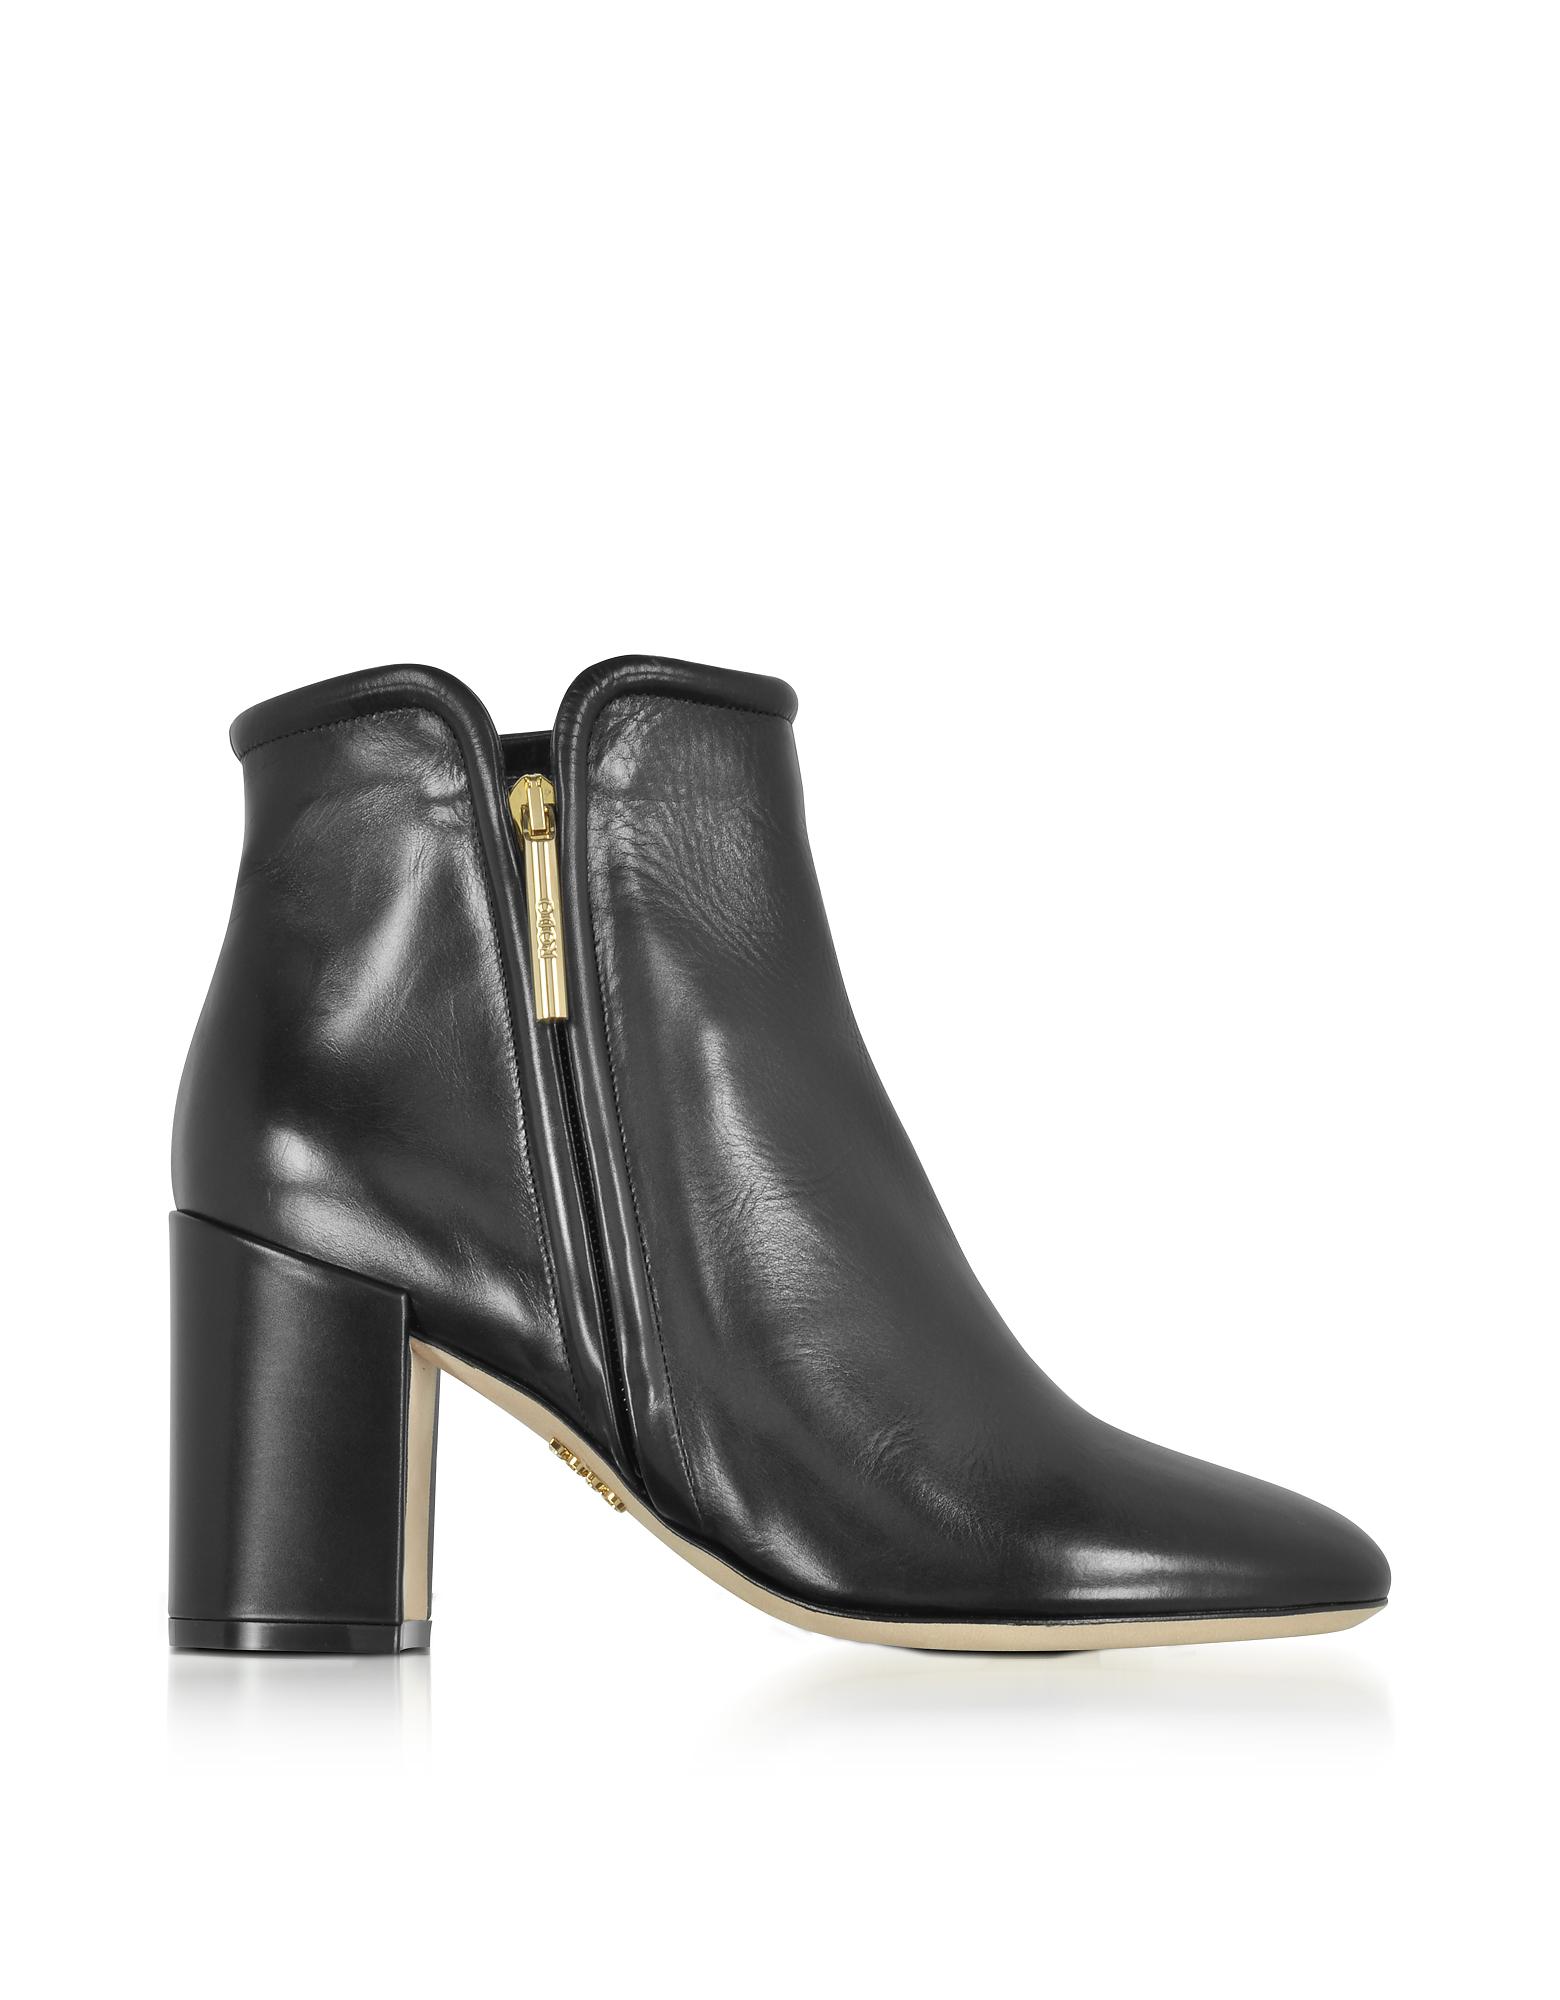 Lyst - Rodo Black Leather Heel Ankle Boots in Black